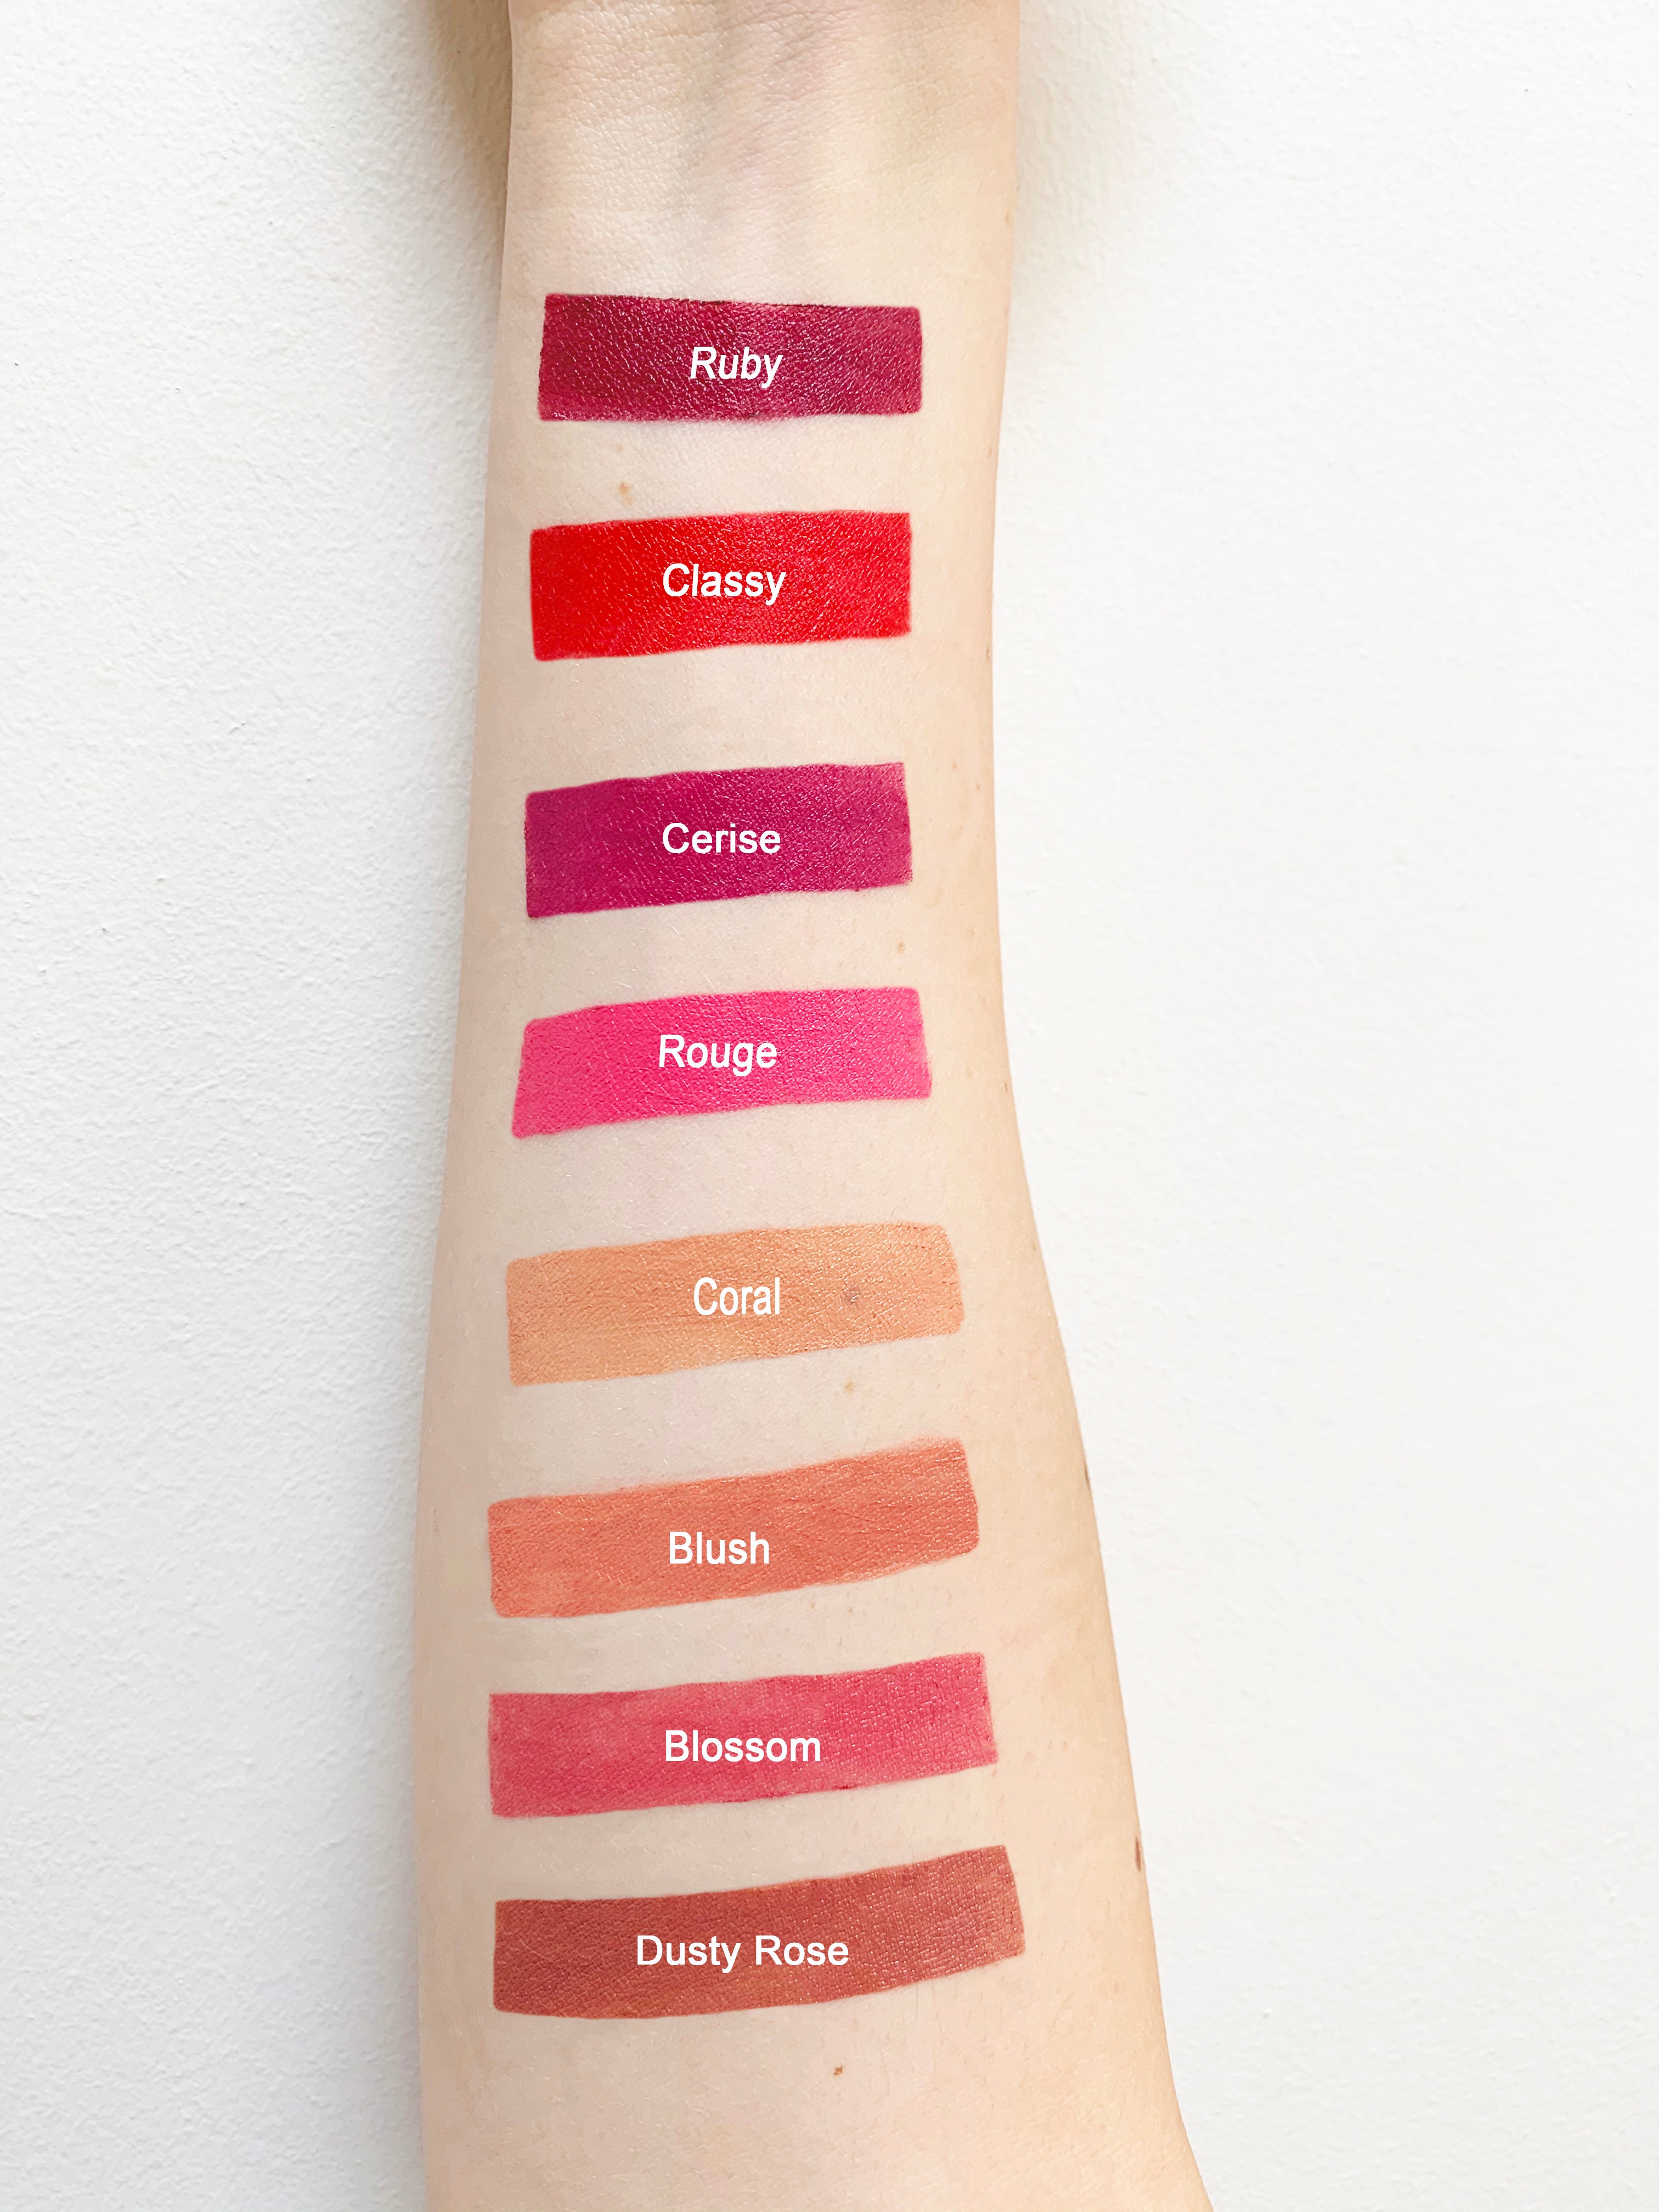 Lipstick Mighty Matte - Rouge